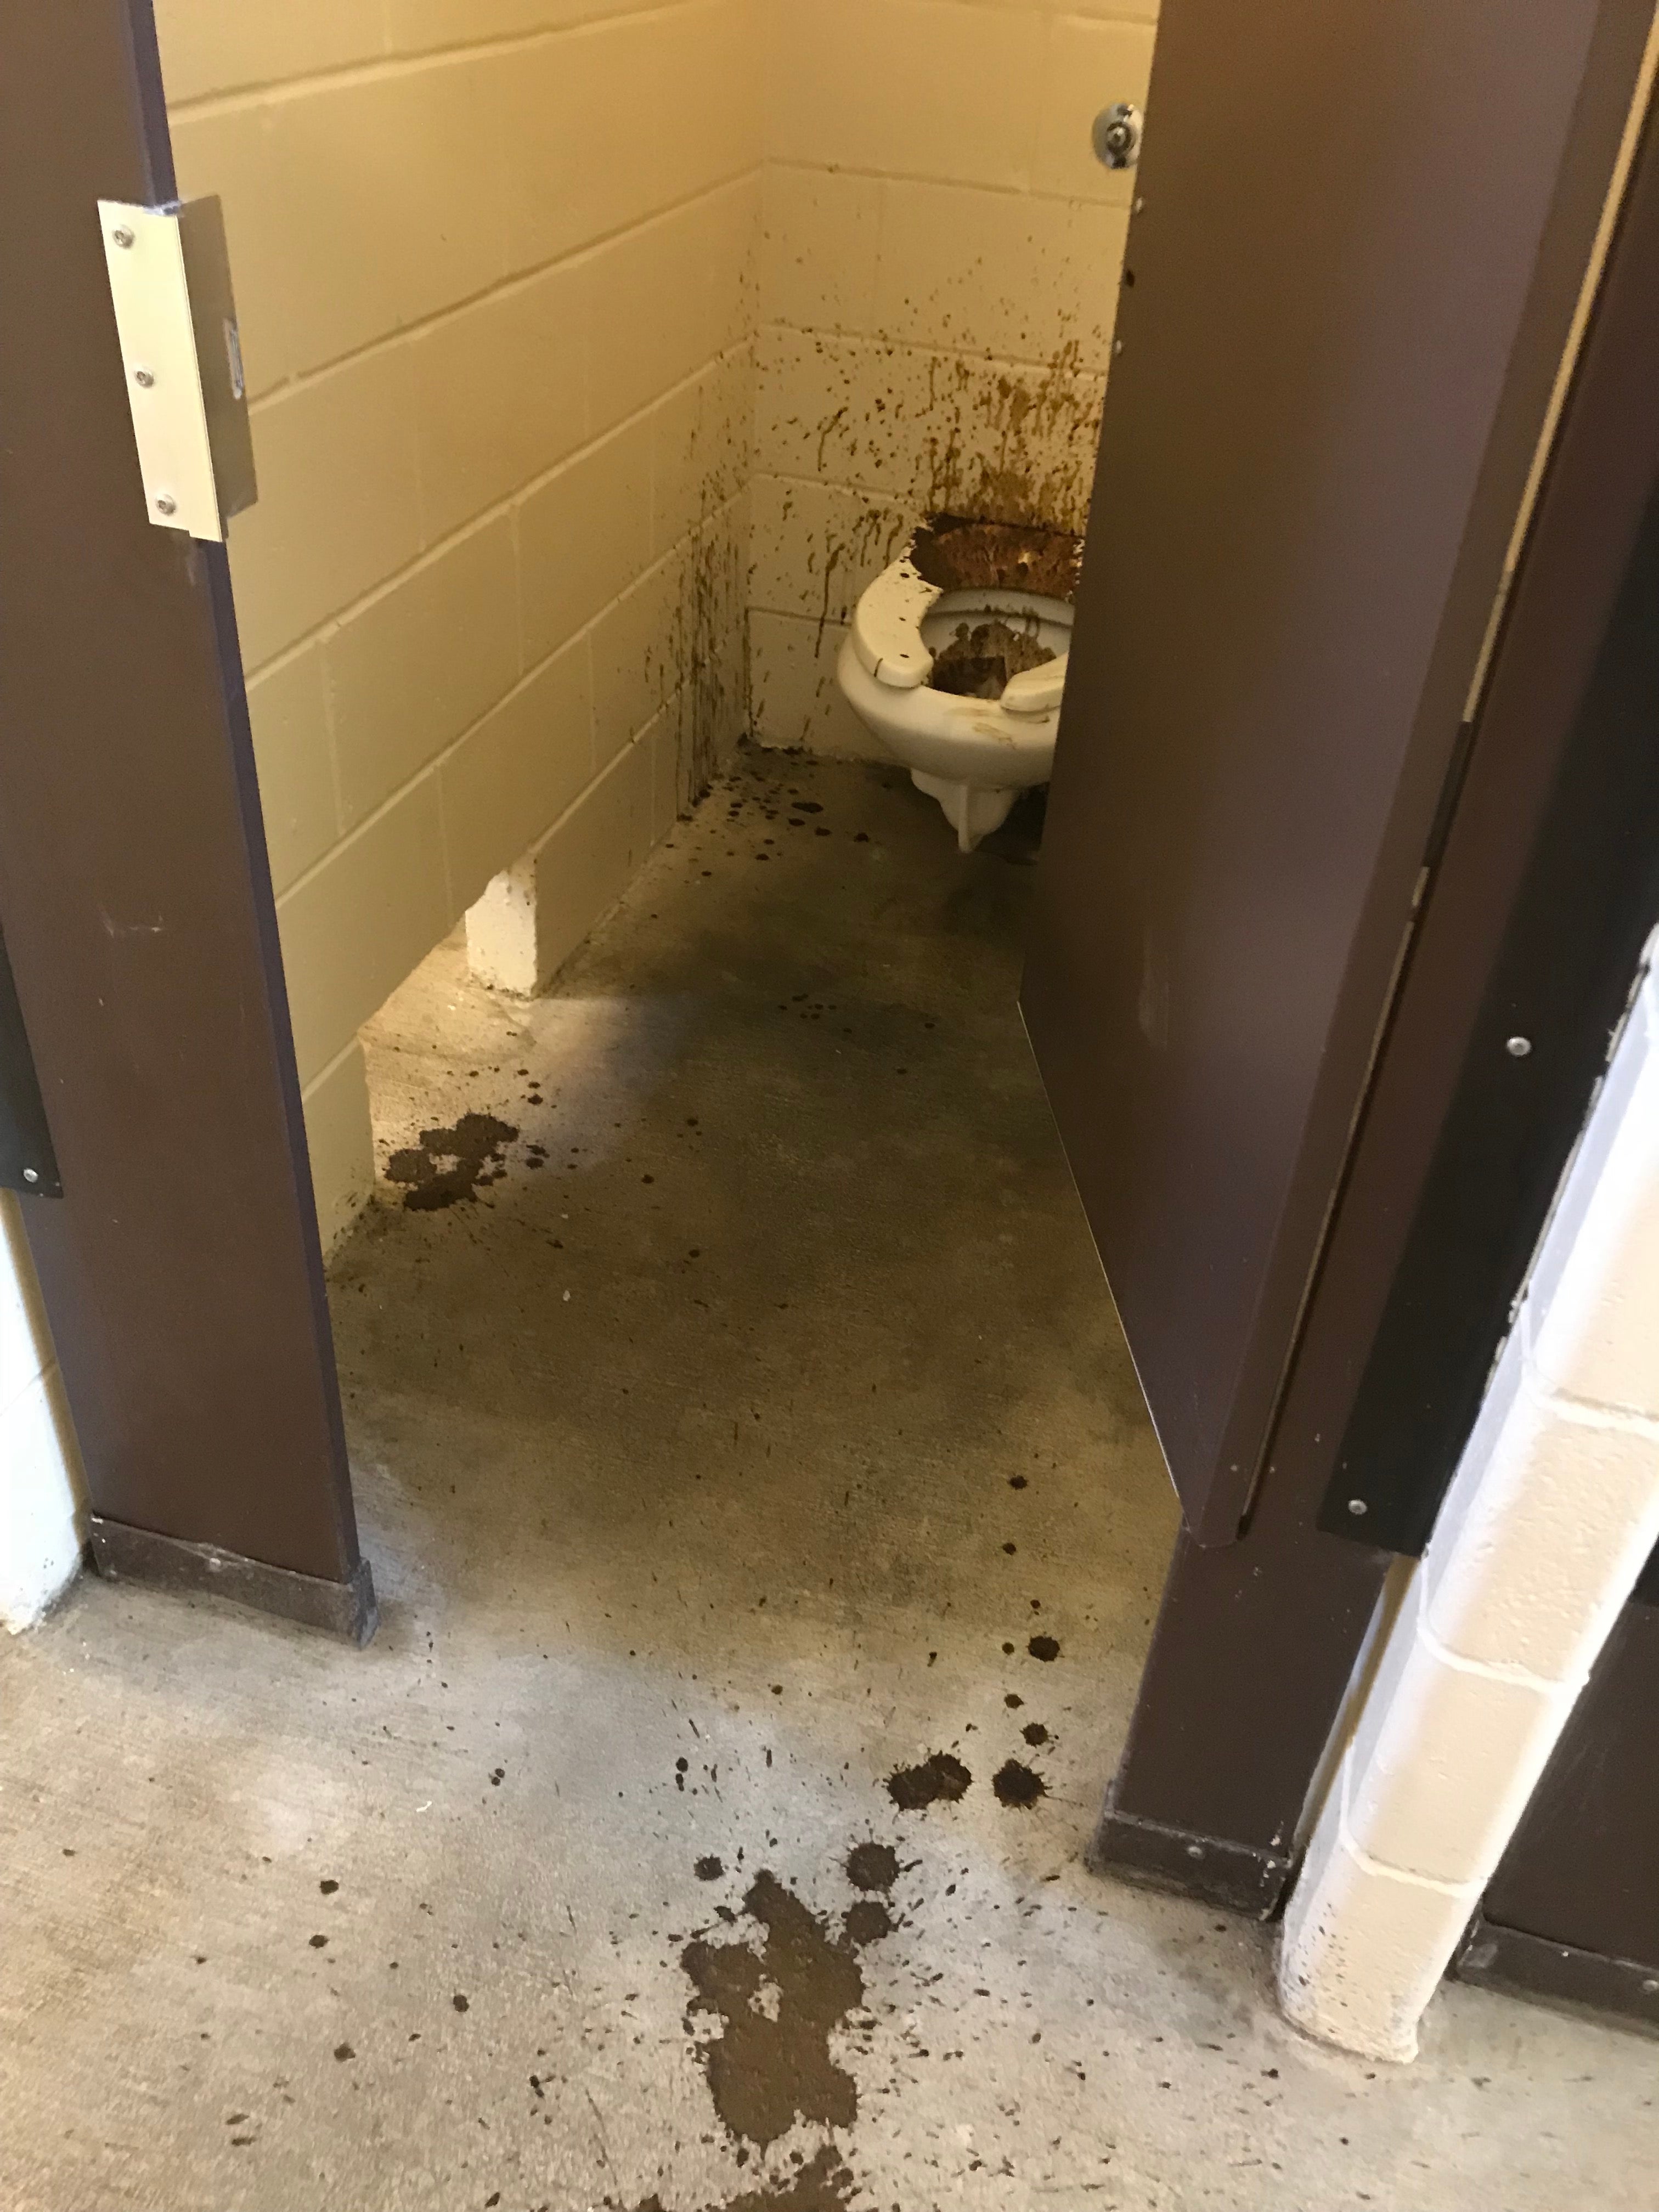 this was in another loop's bathhouse.  It was cleaned within a few hours that morning.